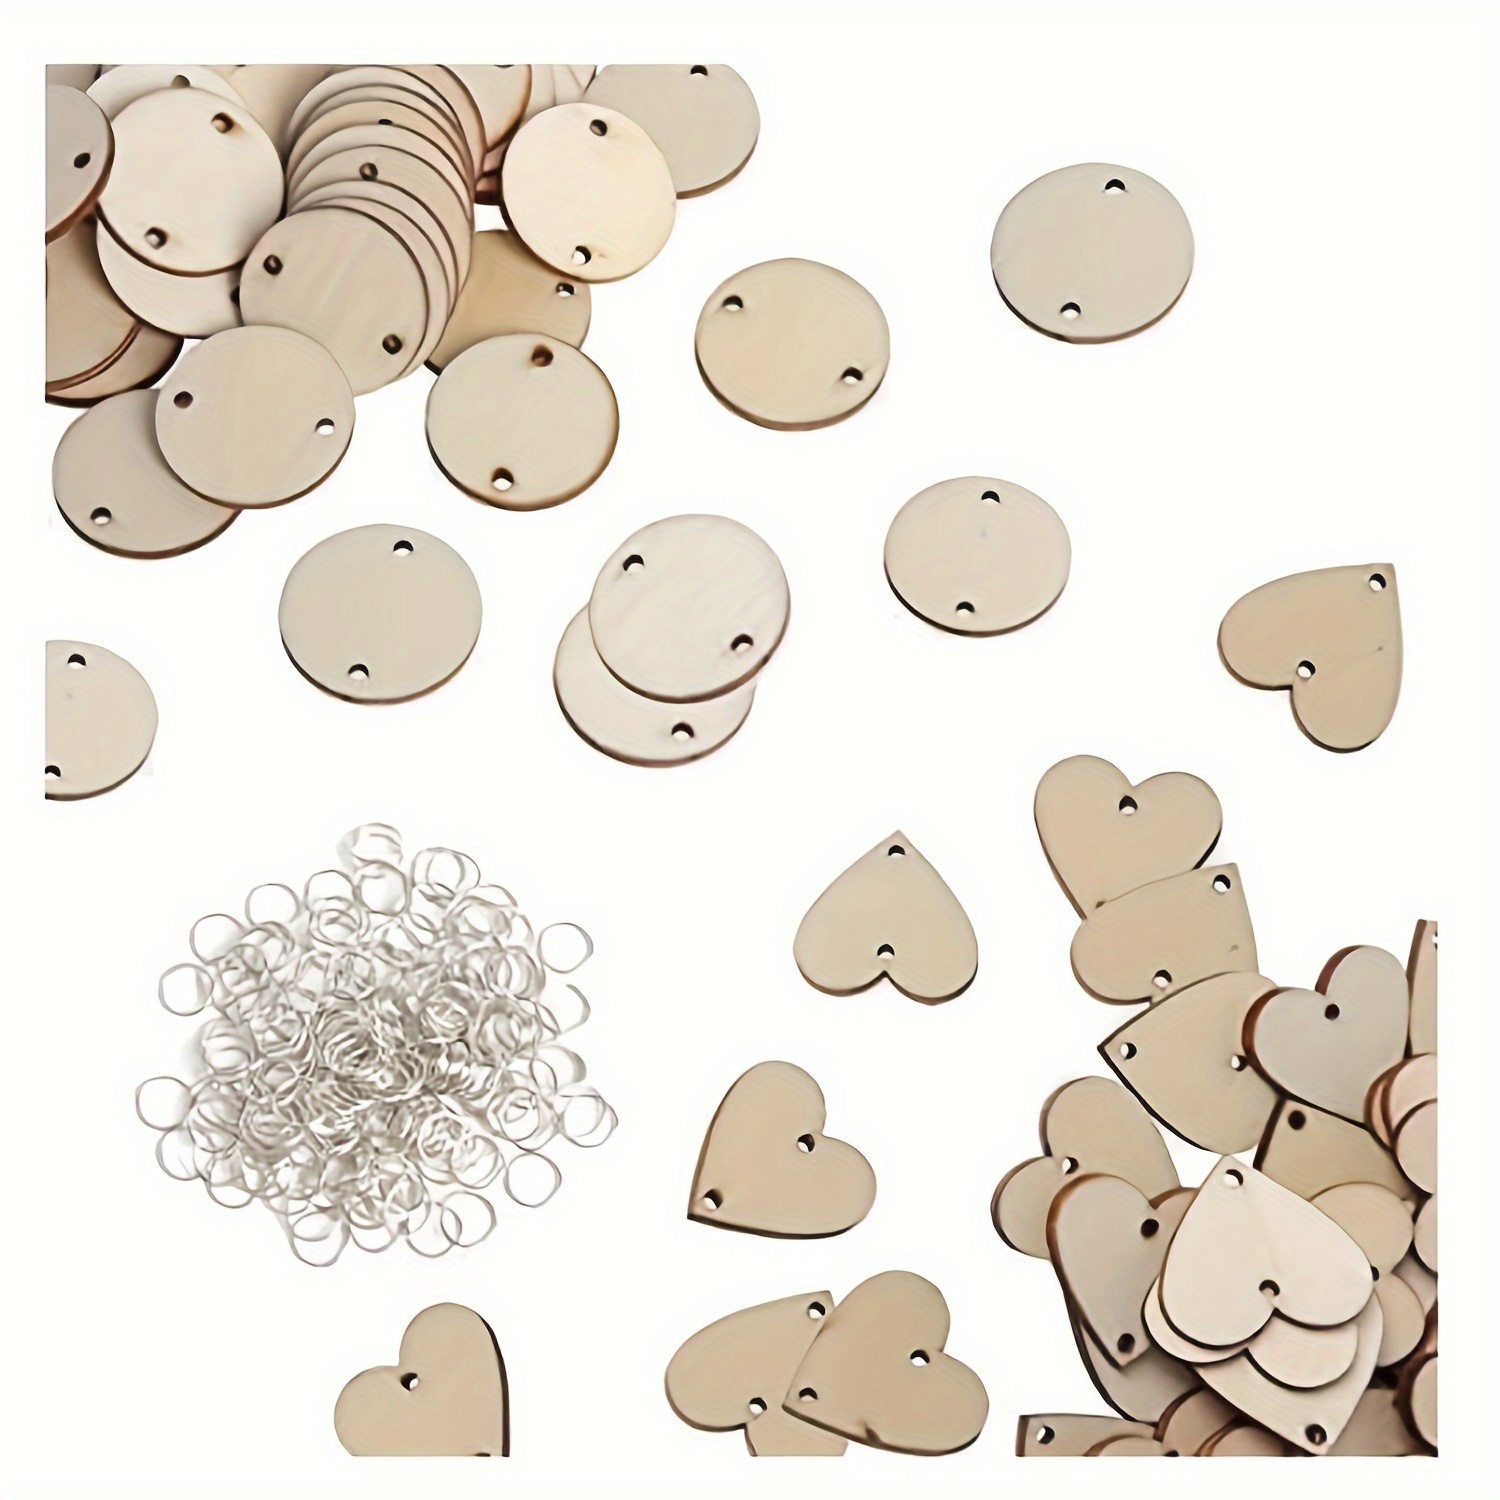 

400 Pieces In Total, 200 Pcs Wooden Circles Wooden Heart Discs With Holes And 200 Pcs 12mm Rings, Wood Slices Discs Tags For Wedding Christmas Ornaments Birthday Boards Art Crafts